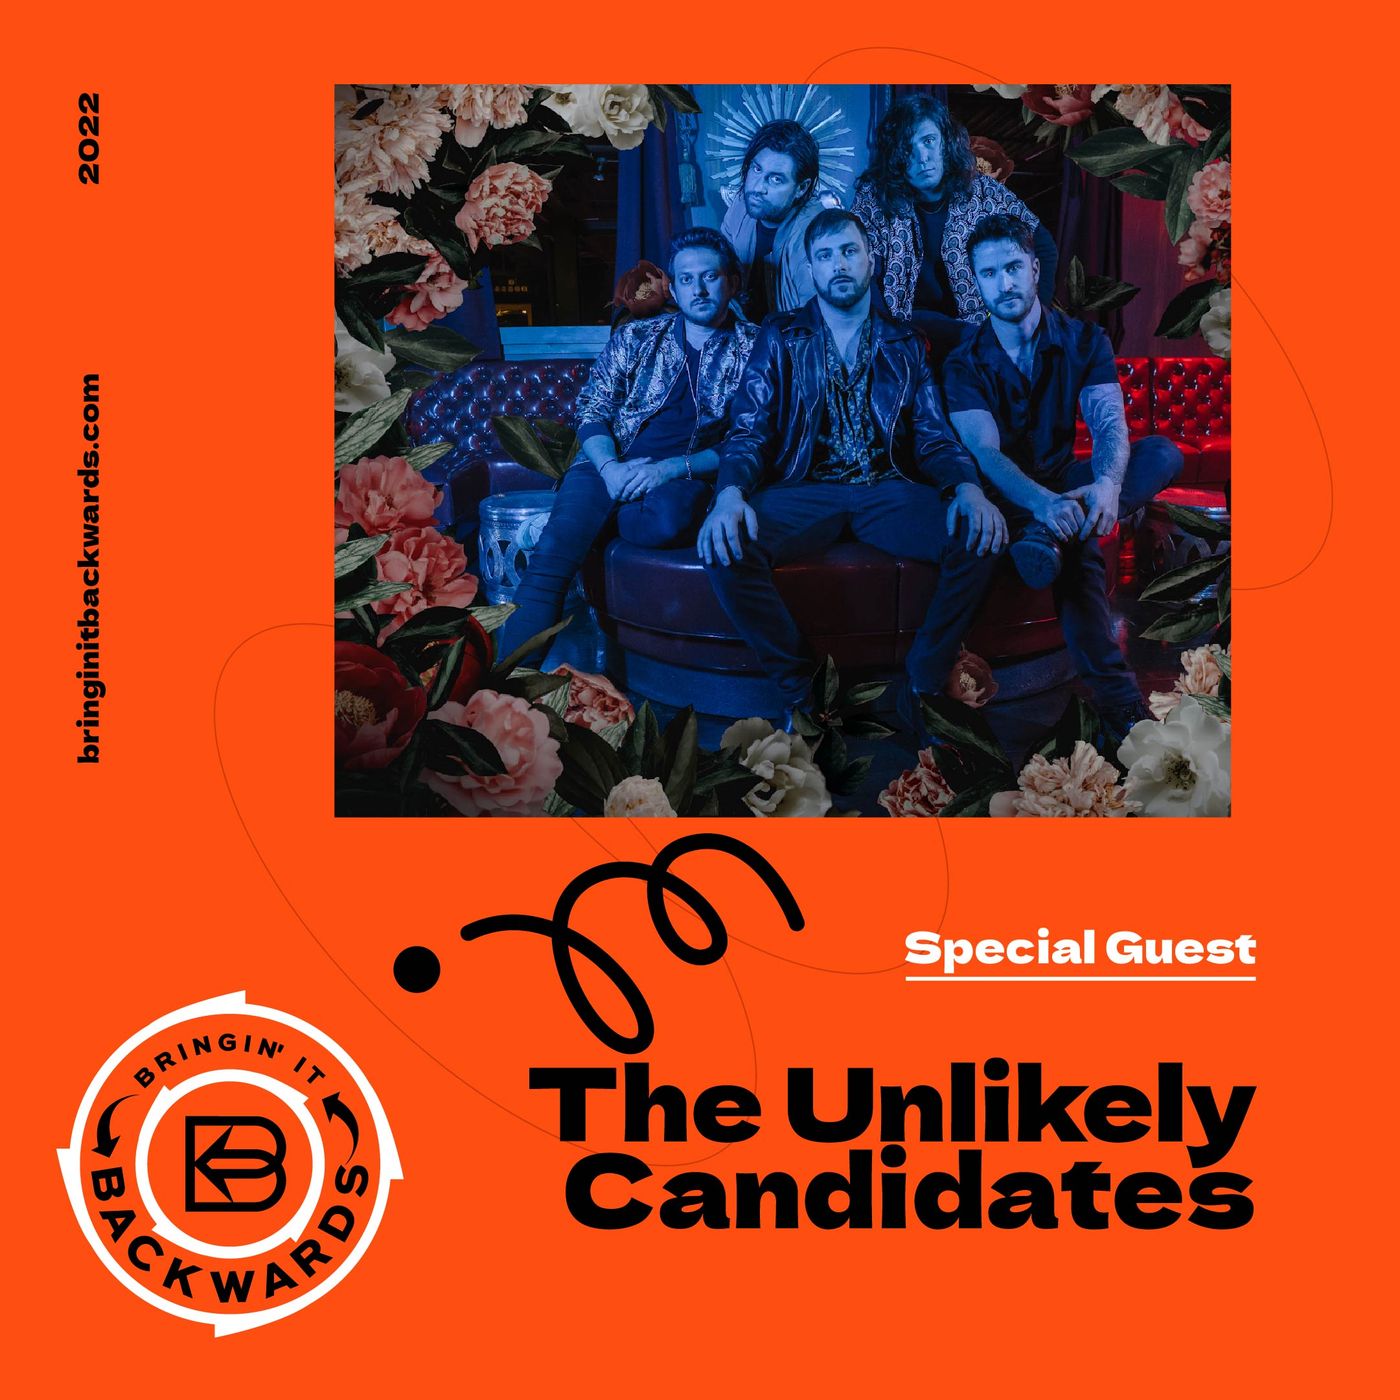 Interview with The Unlikely Candidates